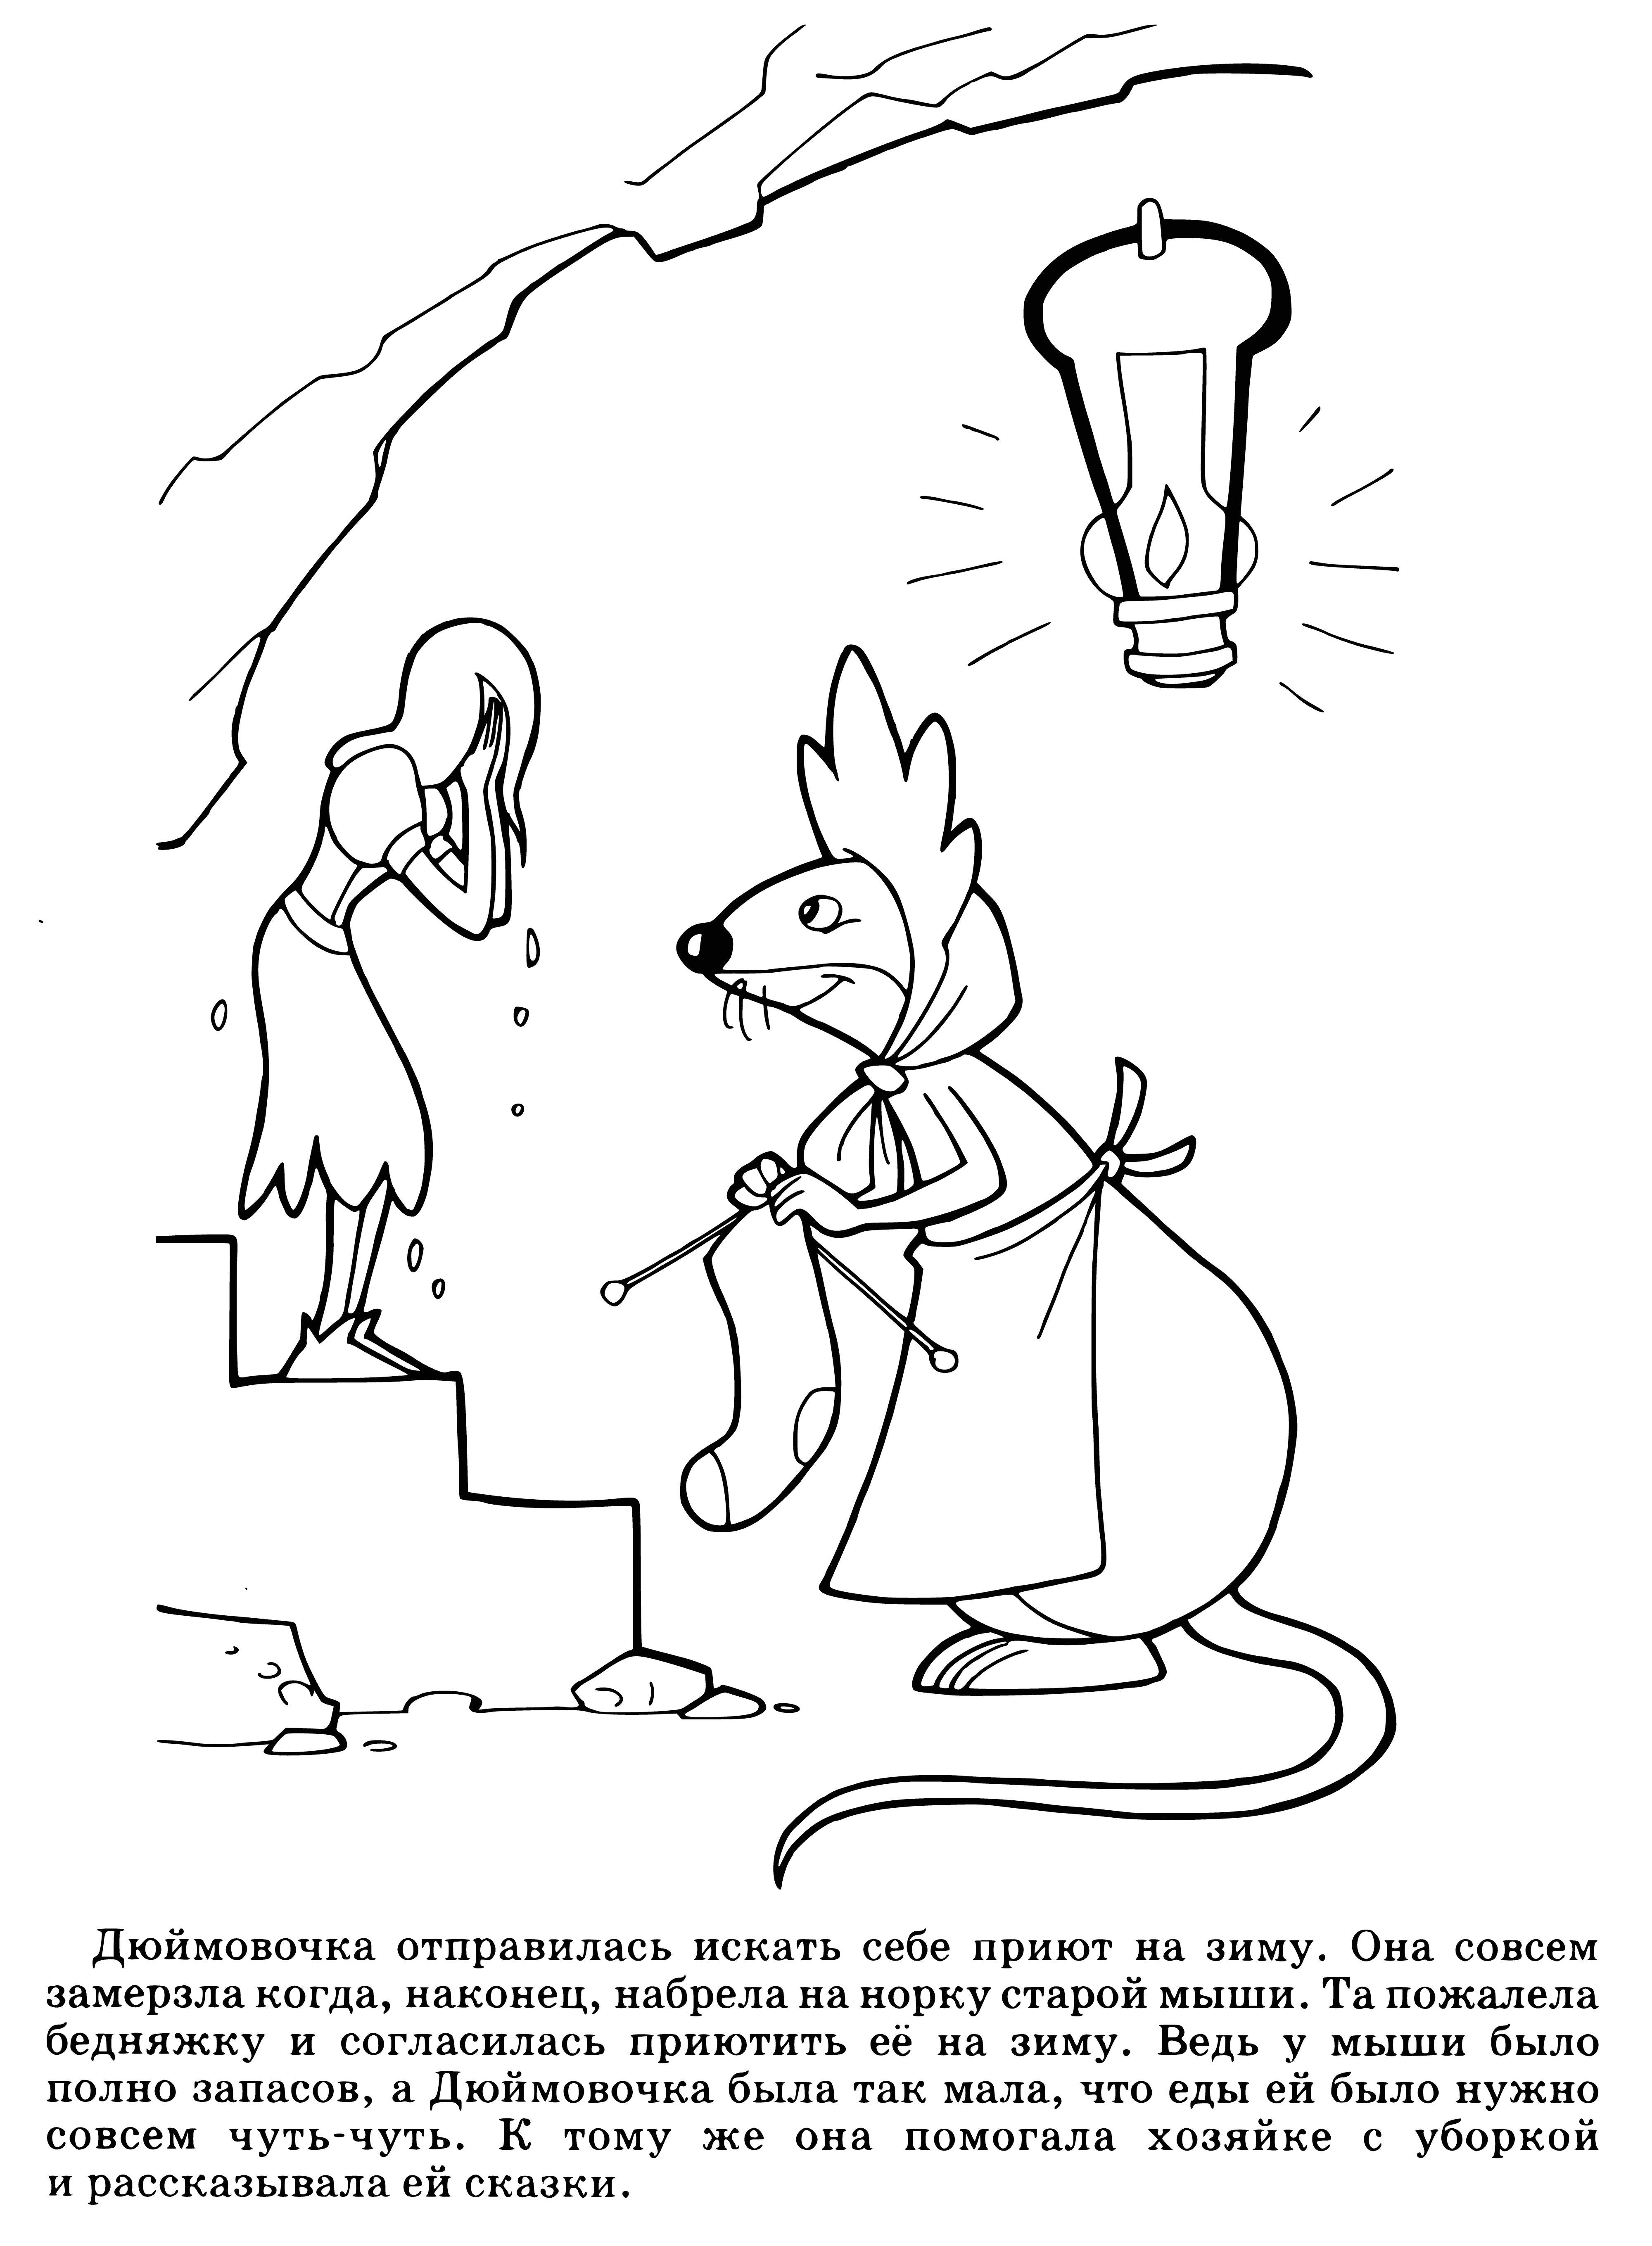 The mouse sheltered her coloring page